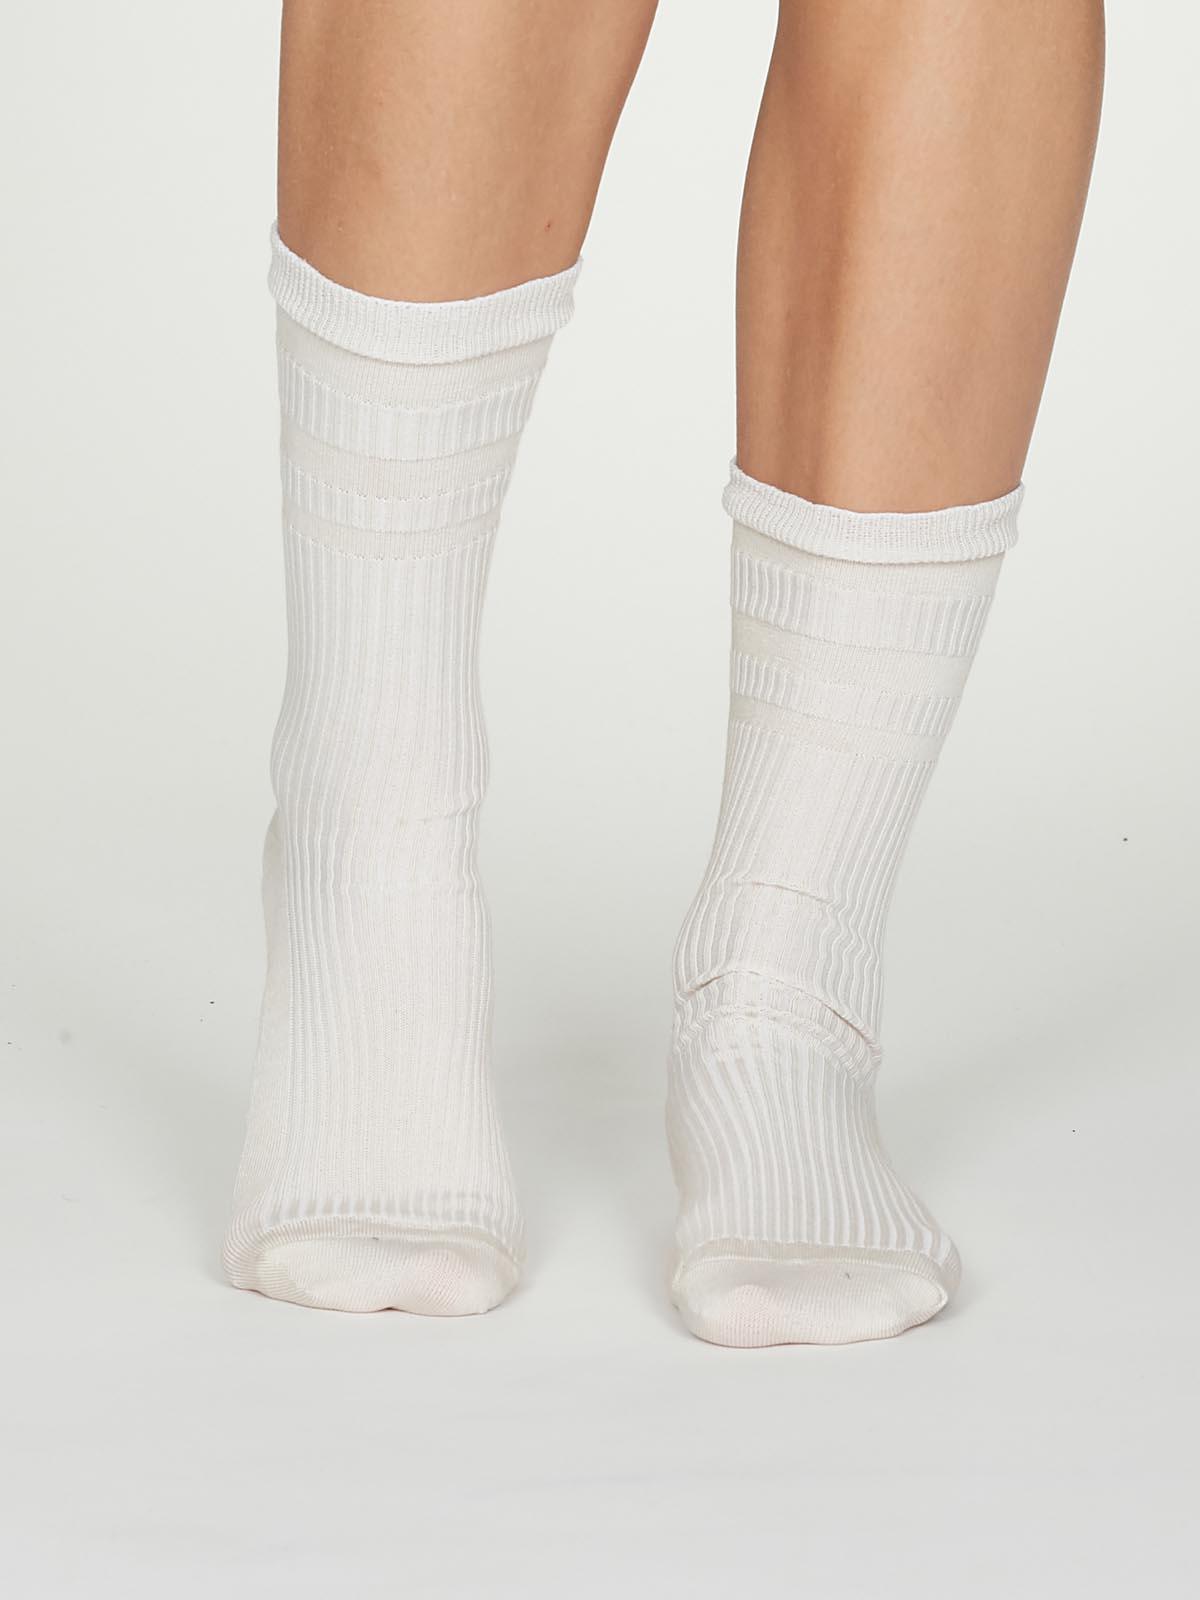 Beatrice SeaCell™  Diabetic Socks - Thought Clothing UK